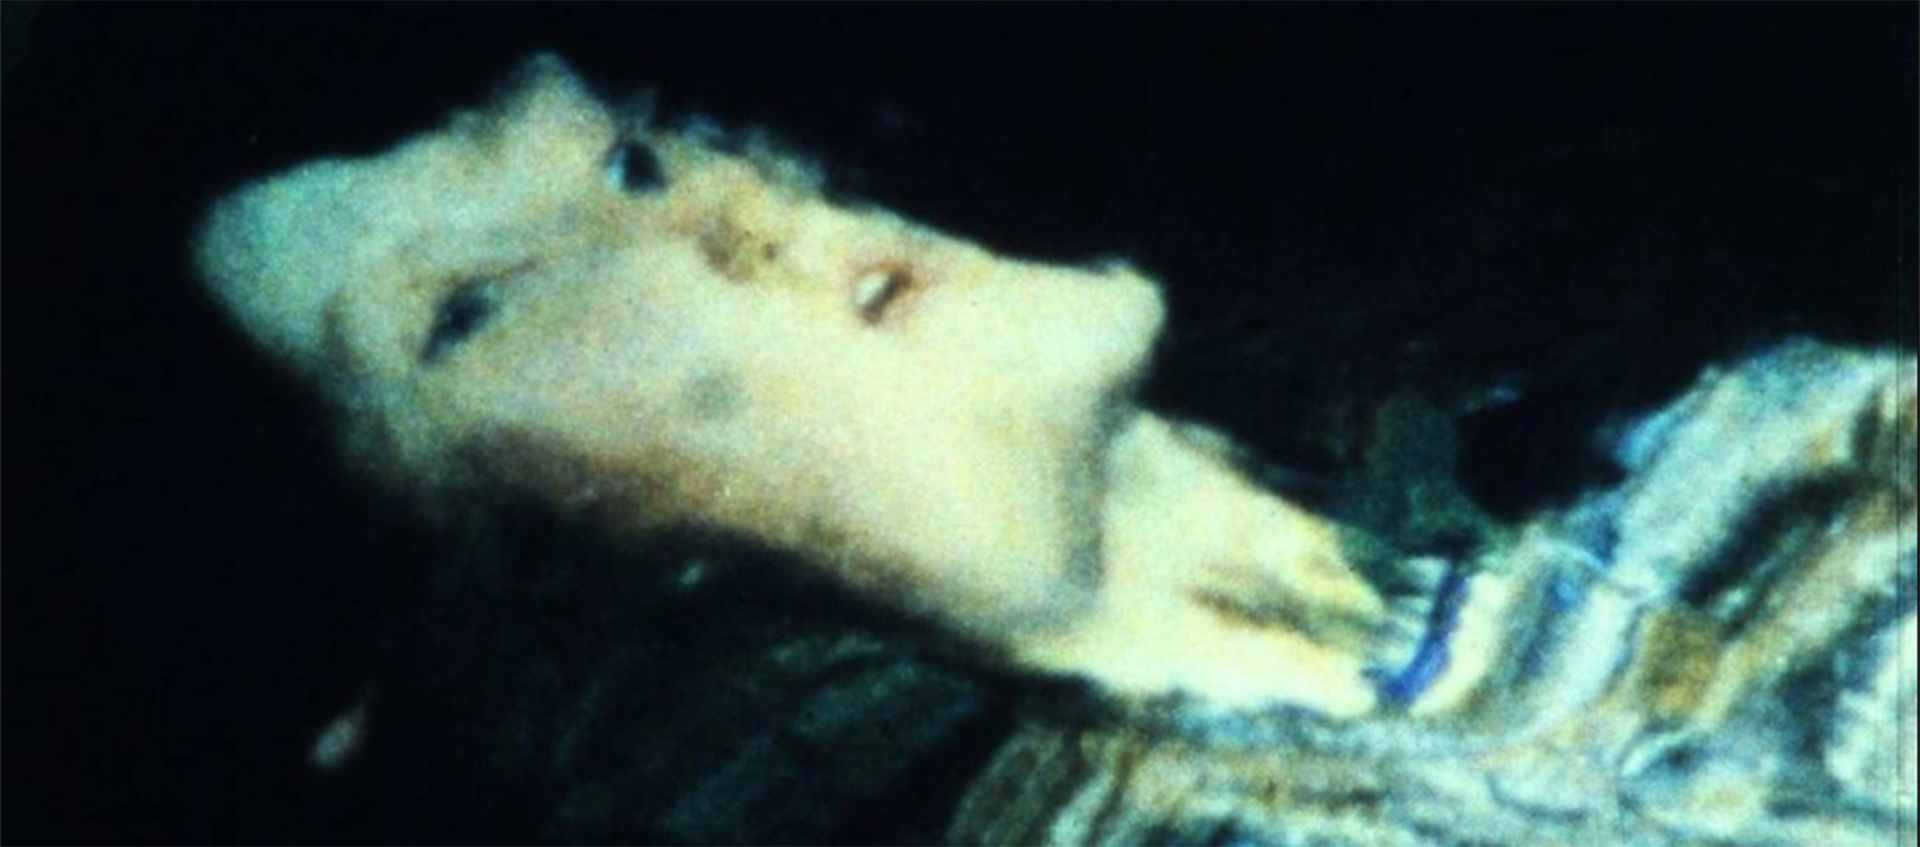 A distorted image of a person lying down on a dark background. Their mouth is slightly open and their face is distorted to look almost nonhuman.